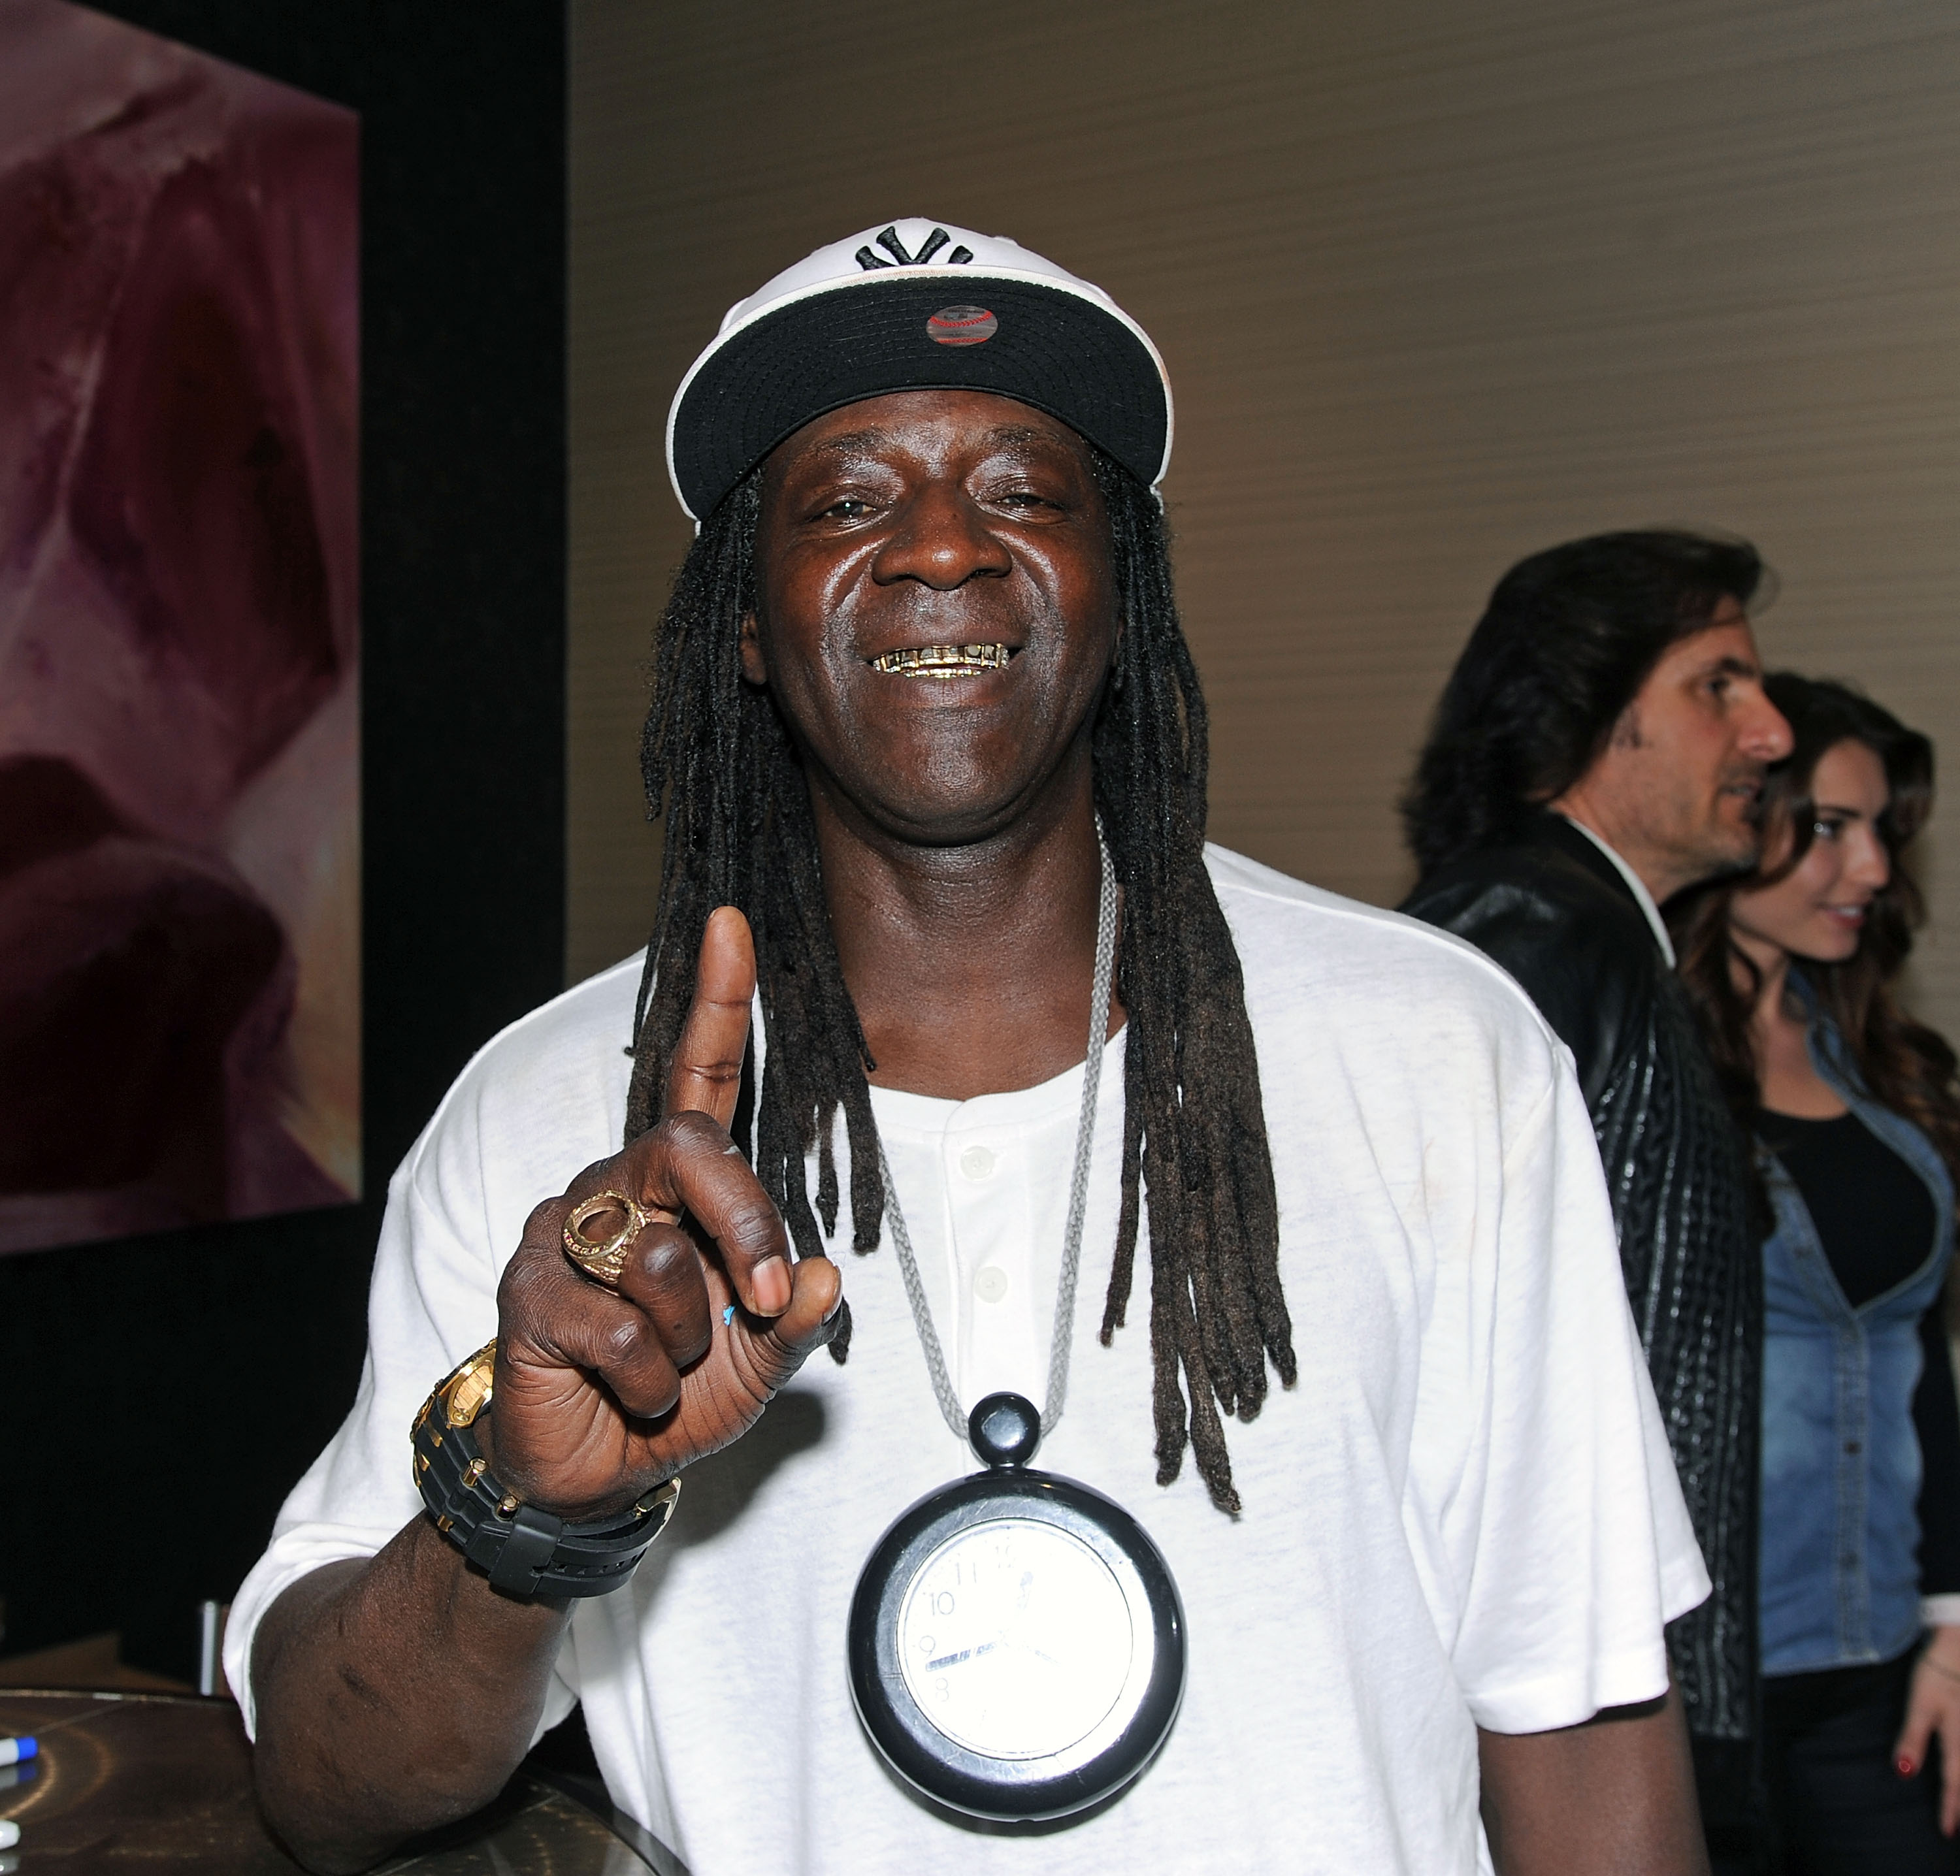 Flavor Flav at the Chiller Theatre Expo in 2017. | Photo: Getty Images